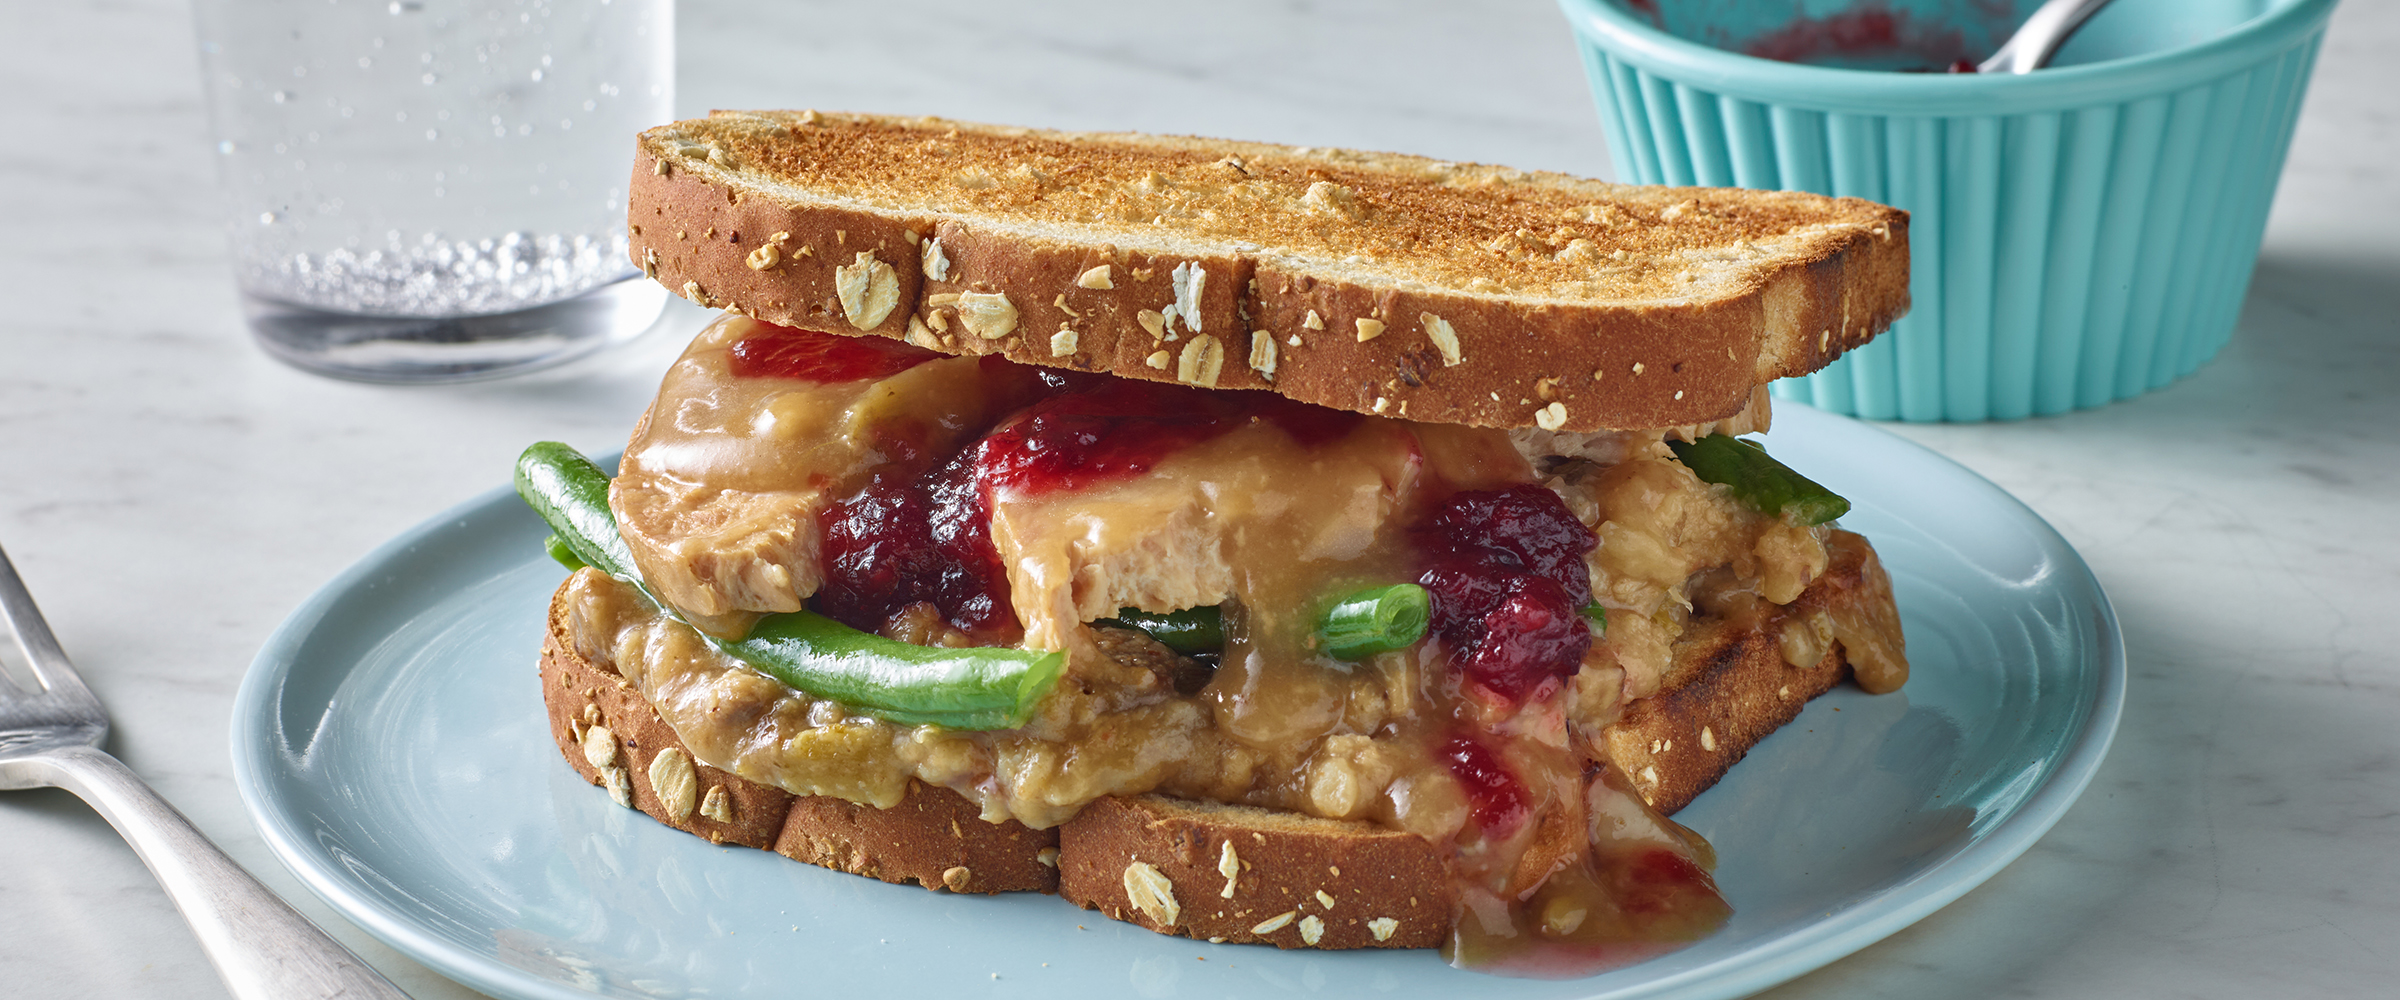 Turkey Dinner Sandwich with gravy and cranberry sauce spilling onto the plate.